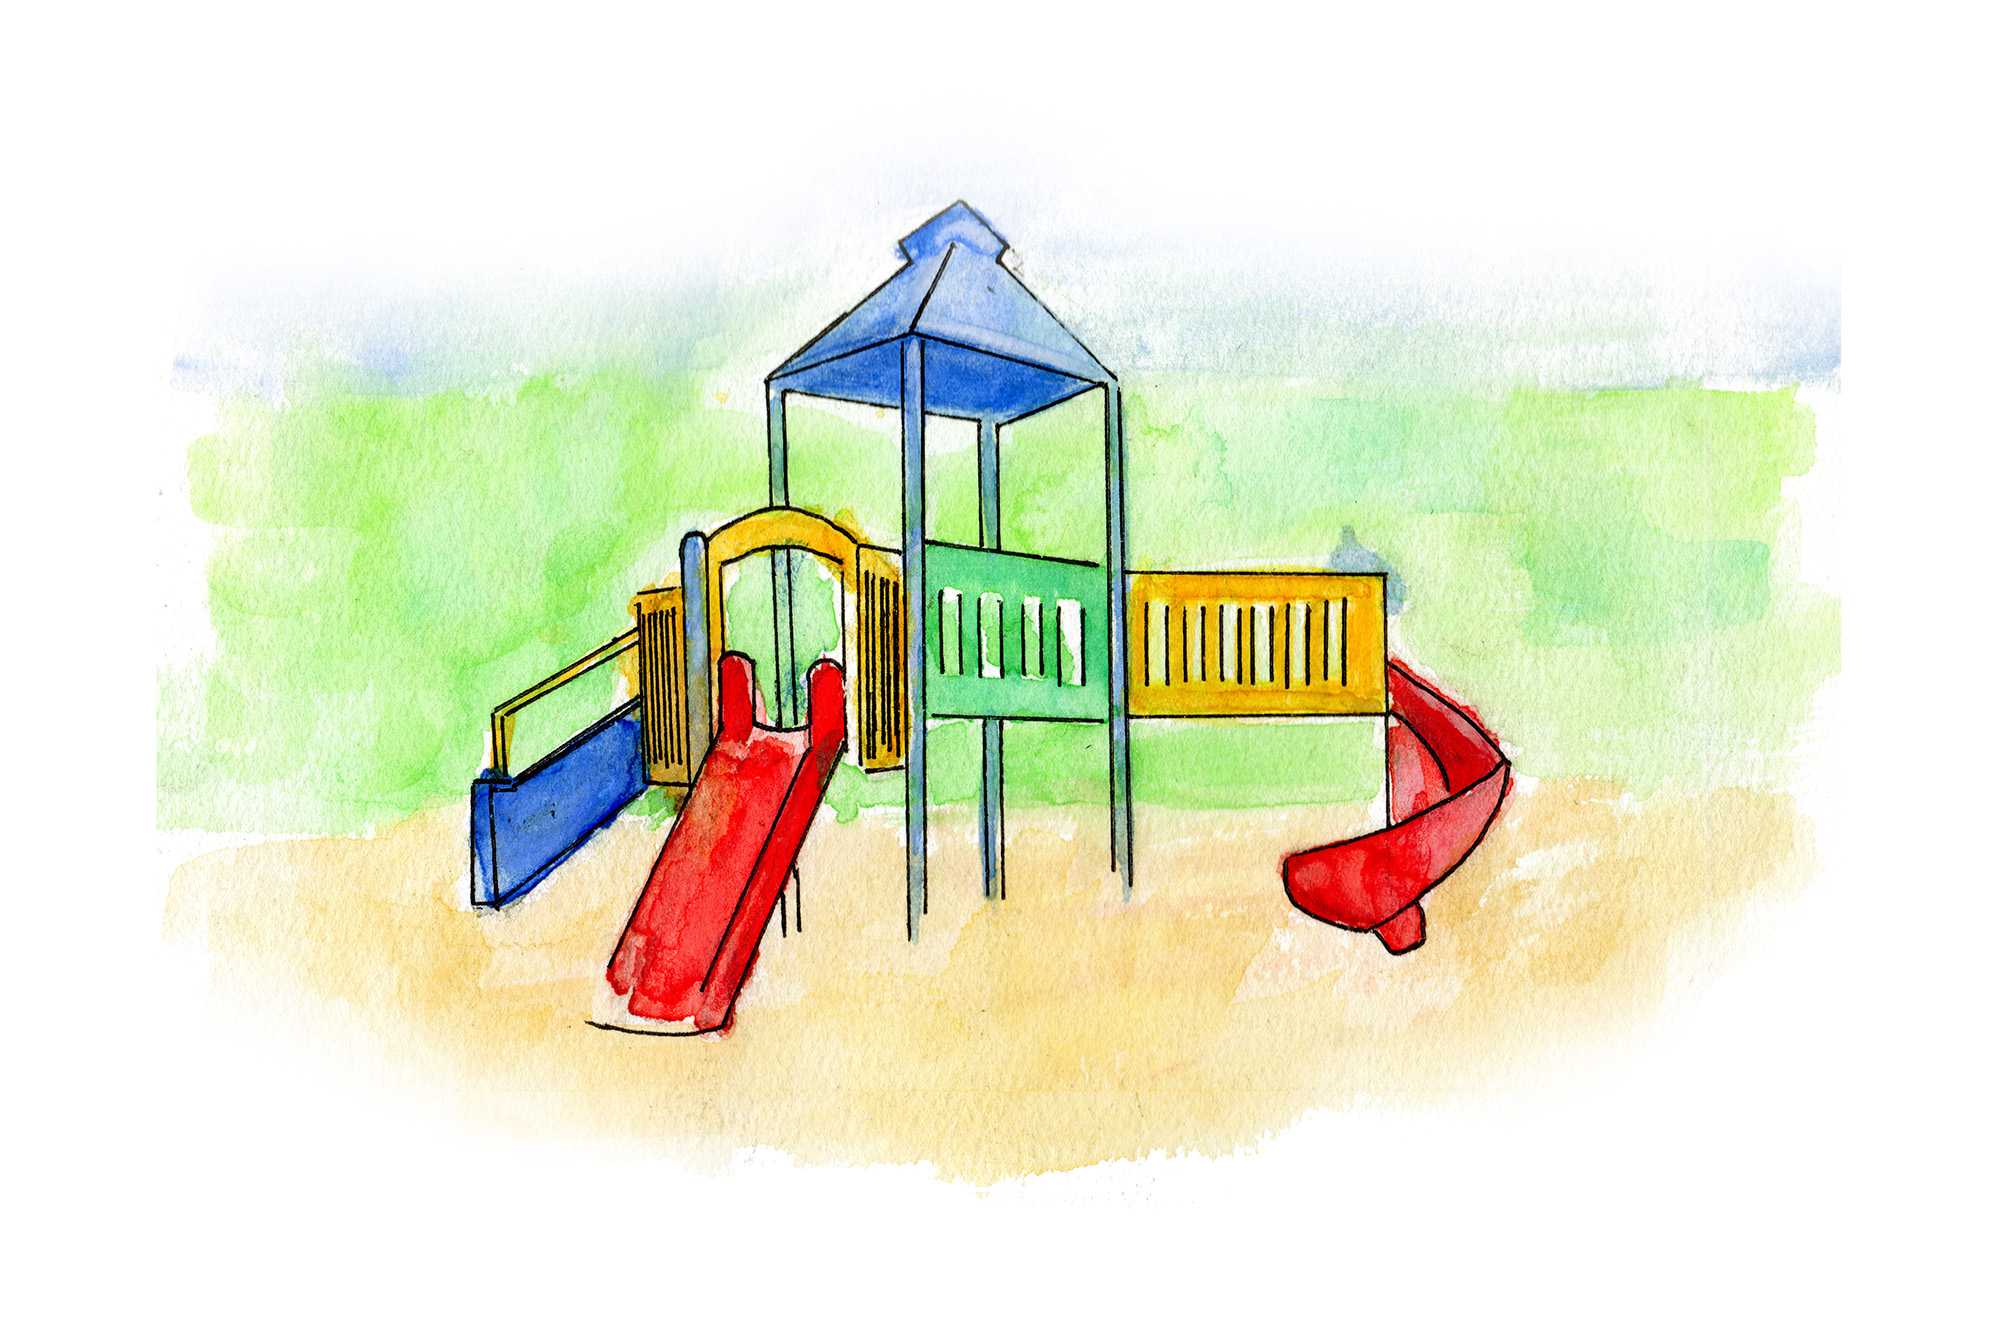 To play or not to play? Teenagers need play structures too